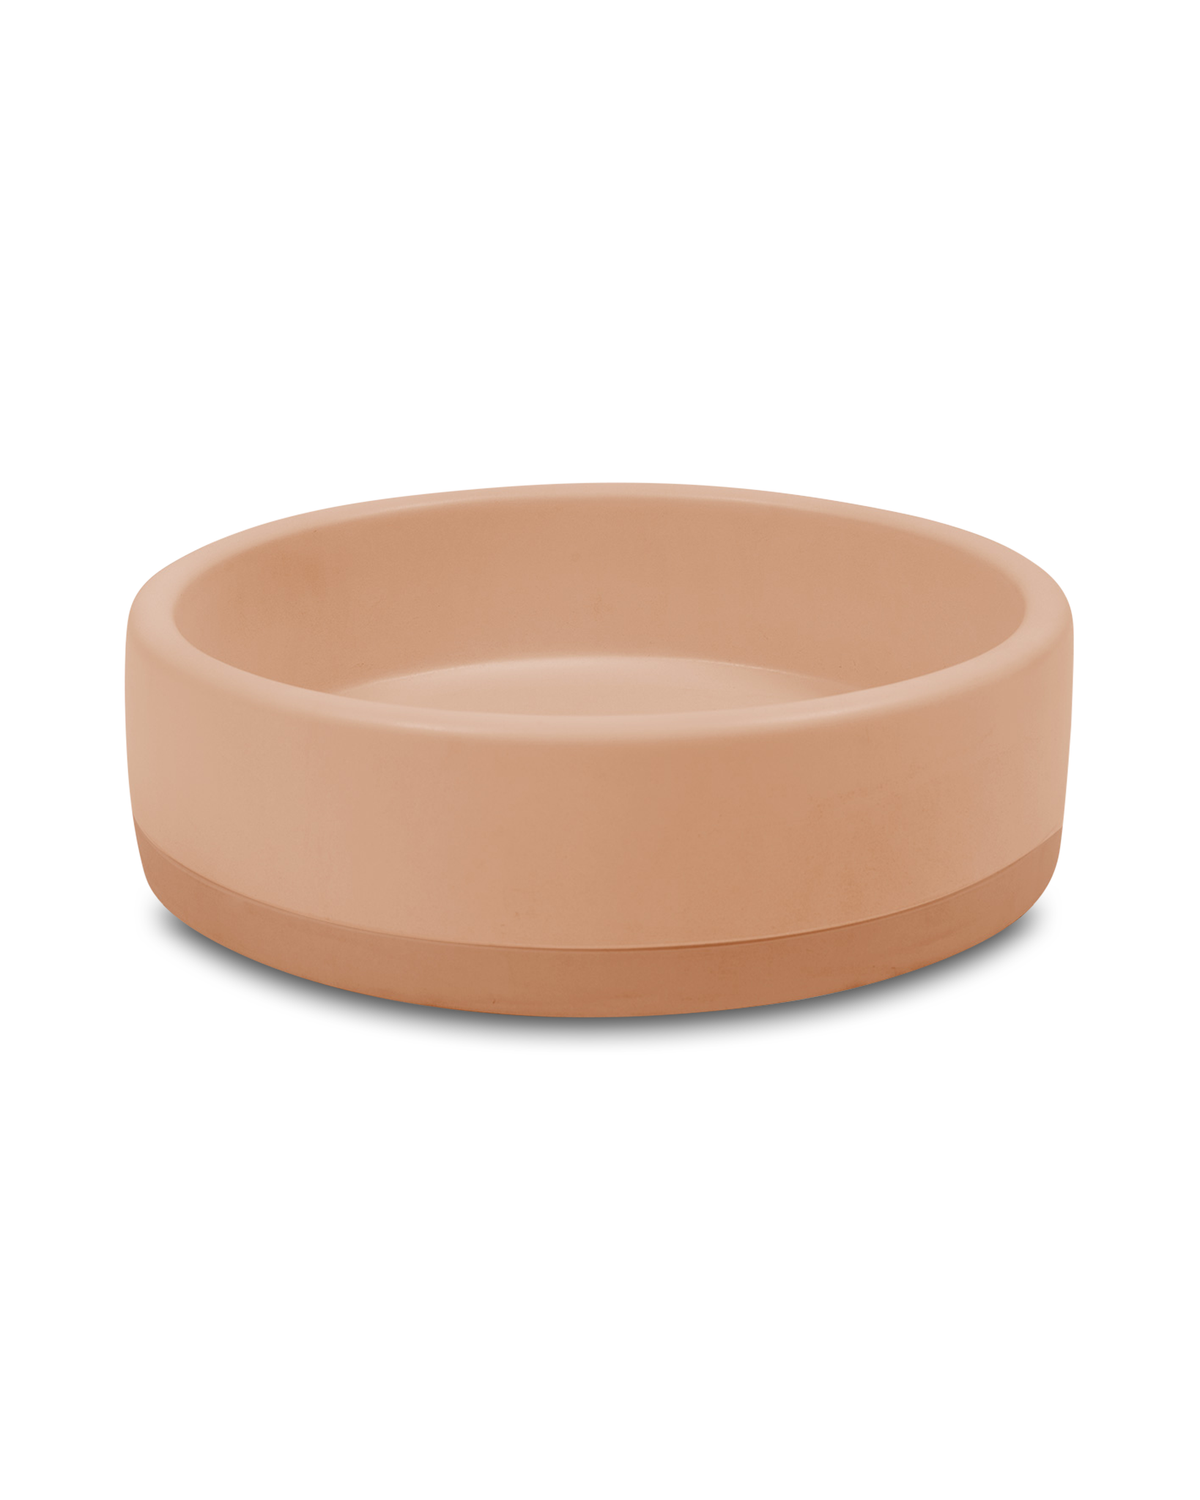 Bowl Basin Two Tone - Surface Mount (Pastel Peach)